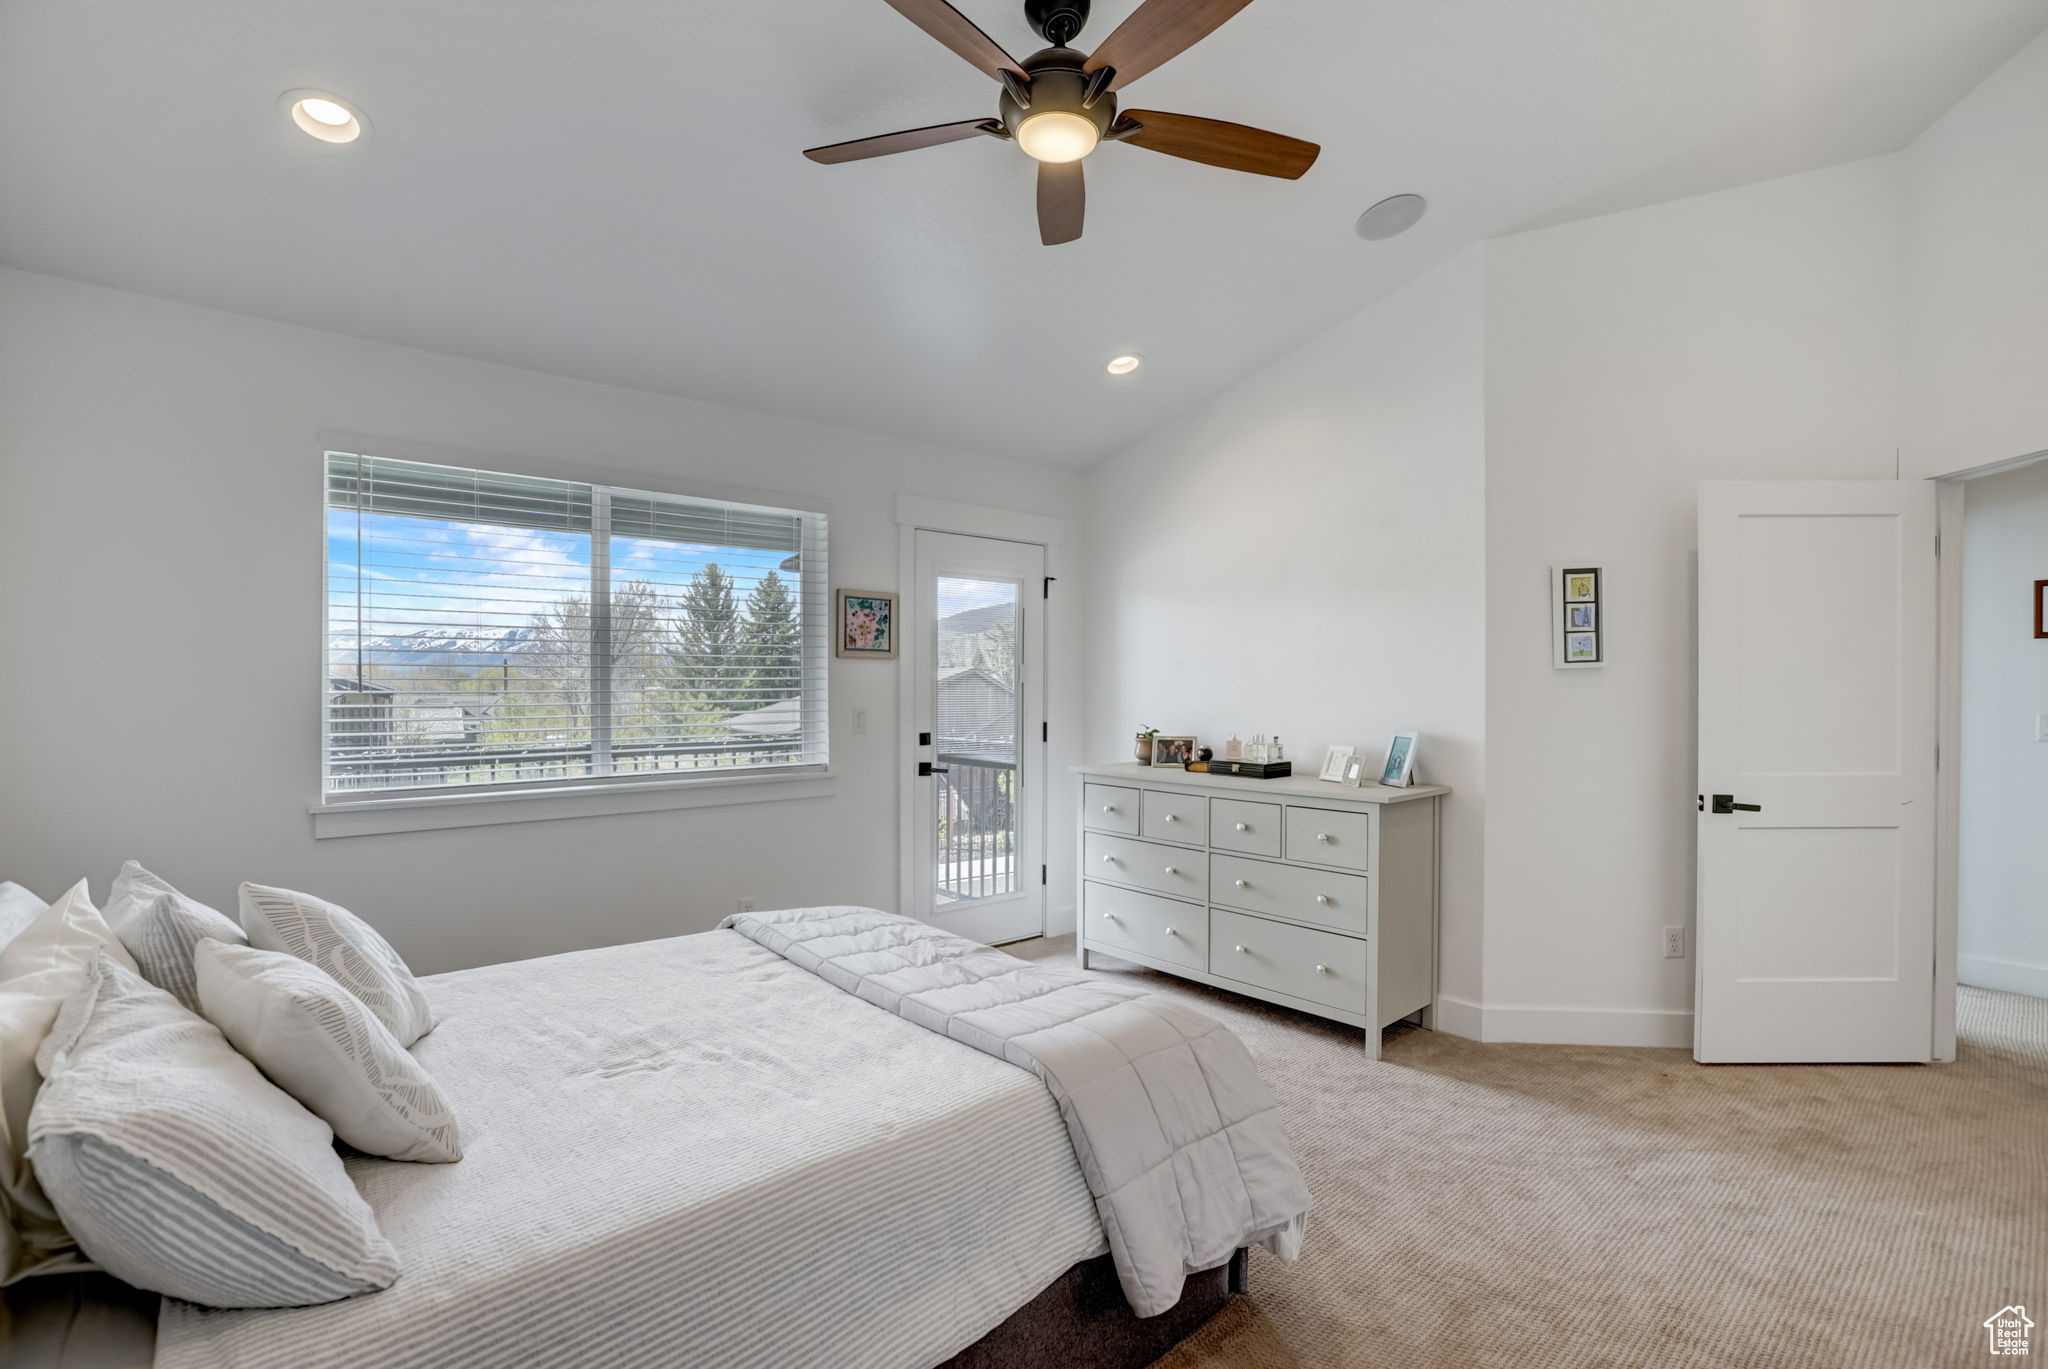 Carpeted bedroom featuring ceiling fan, access to exterior, and lofted ceiling